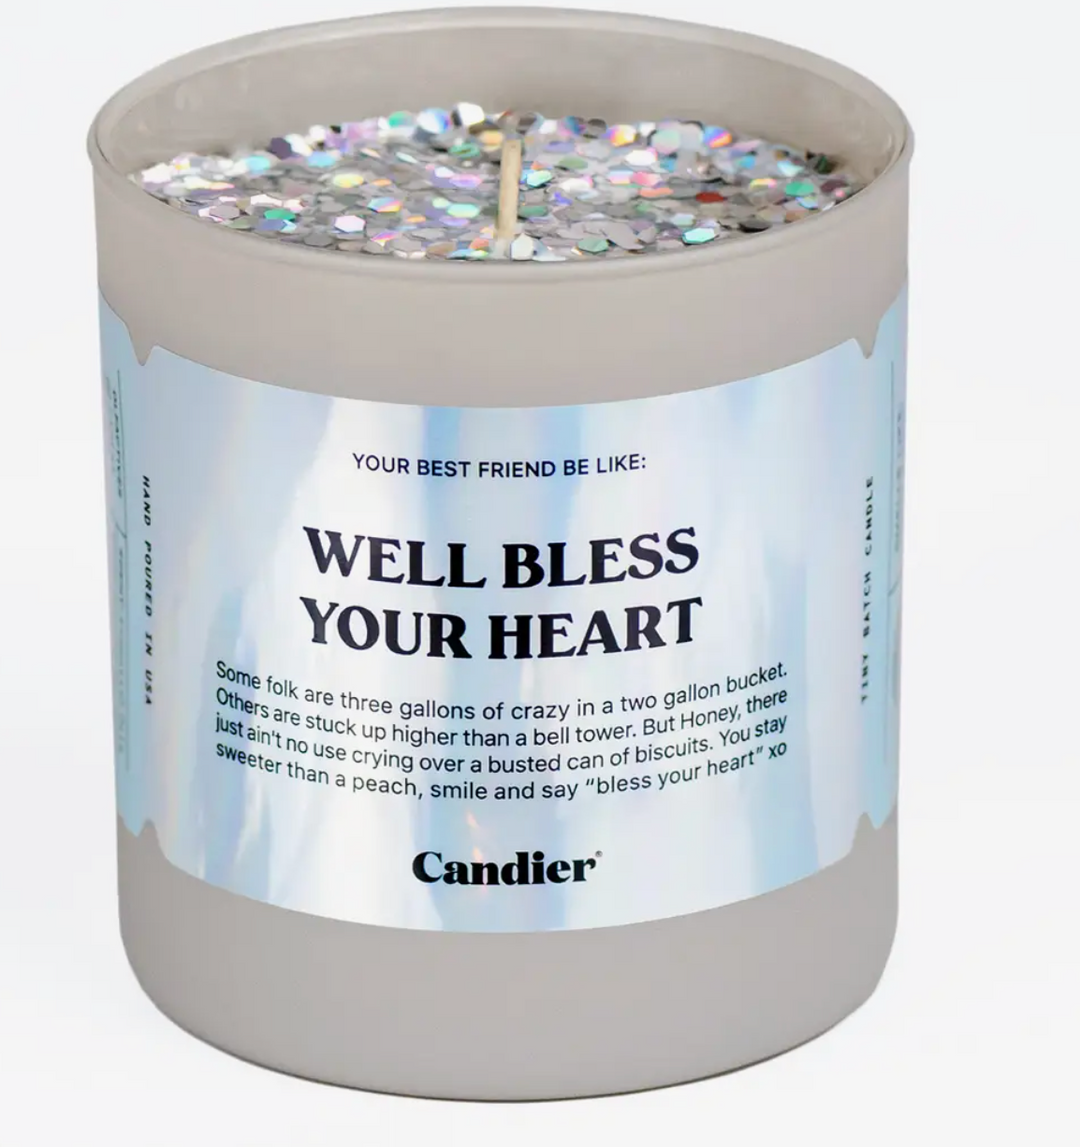 Well Bless Your Heart Candier Candle